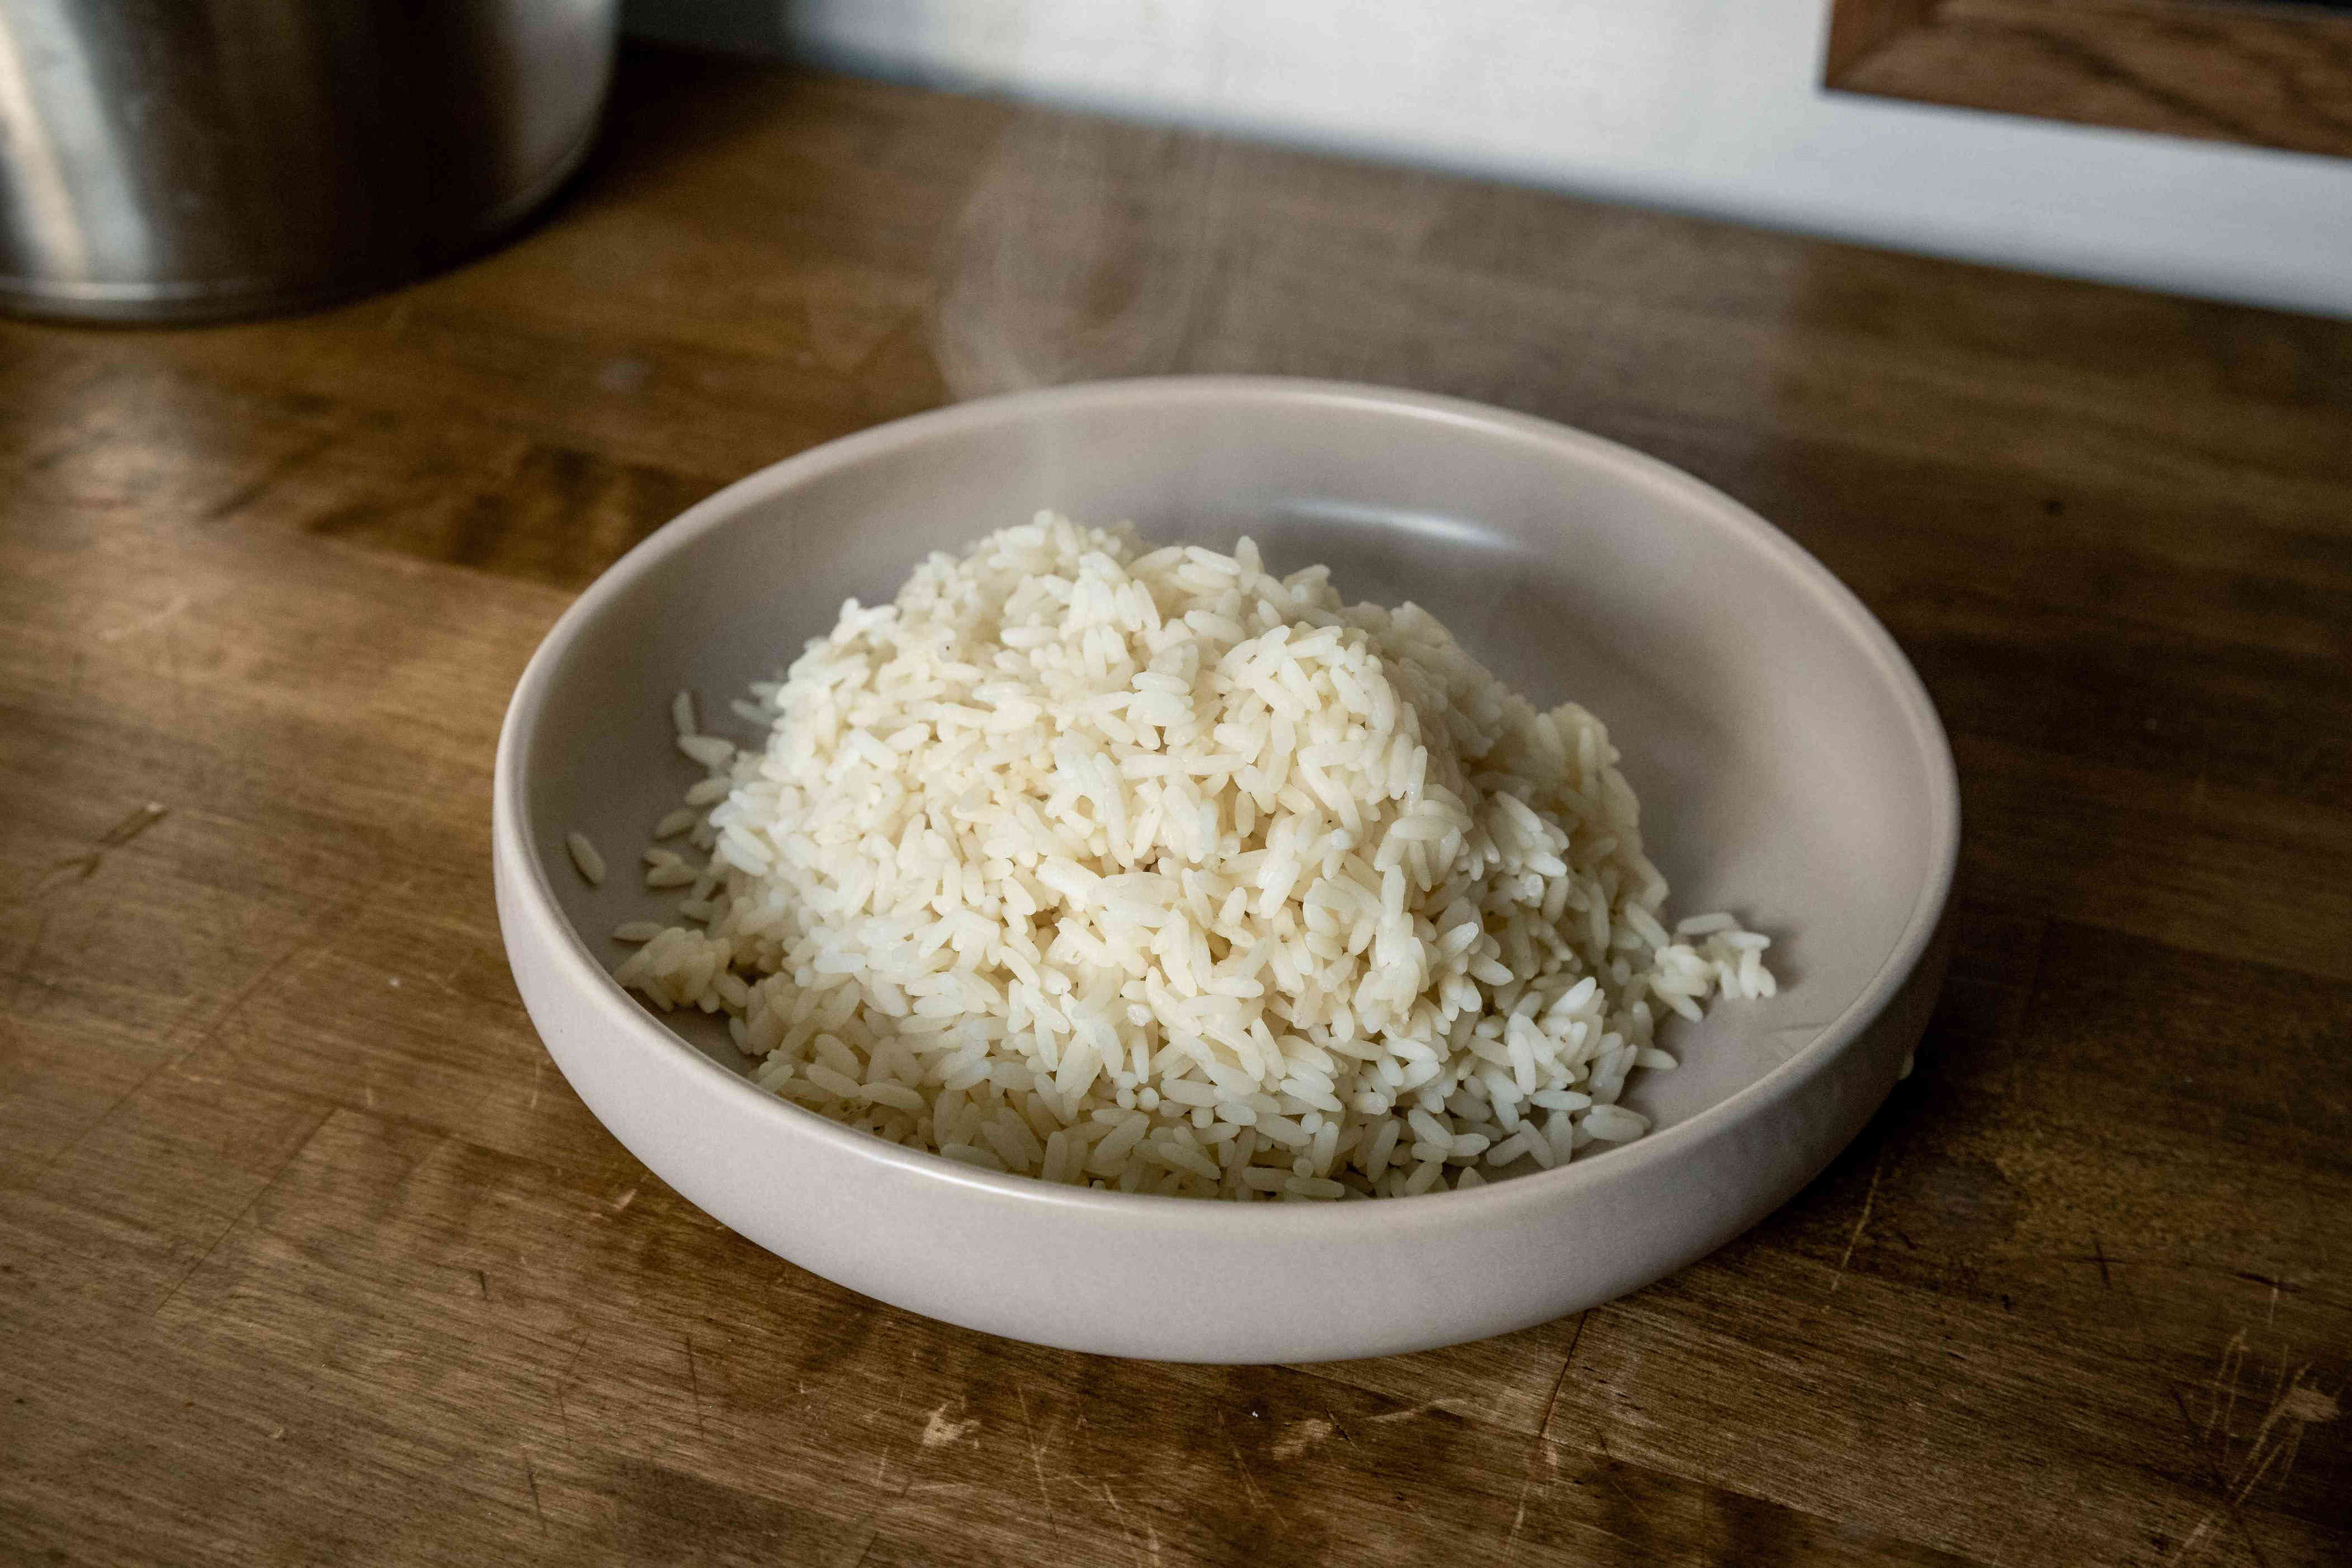 How to Safely Reheat Leftover Rice in the Microwave (Without Drying It Out)